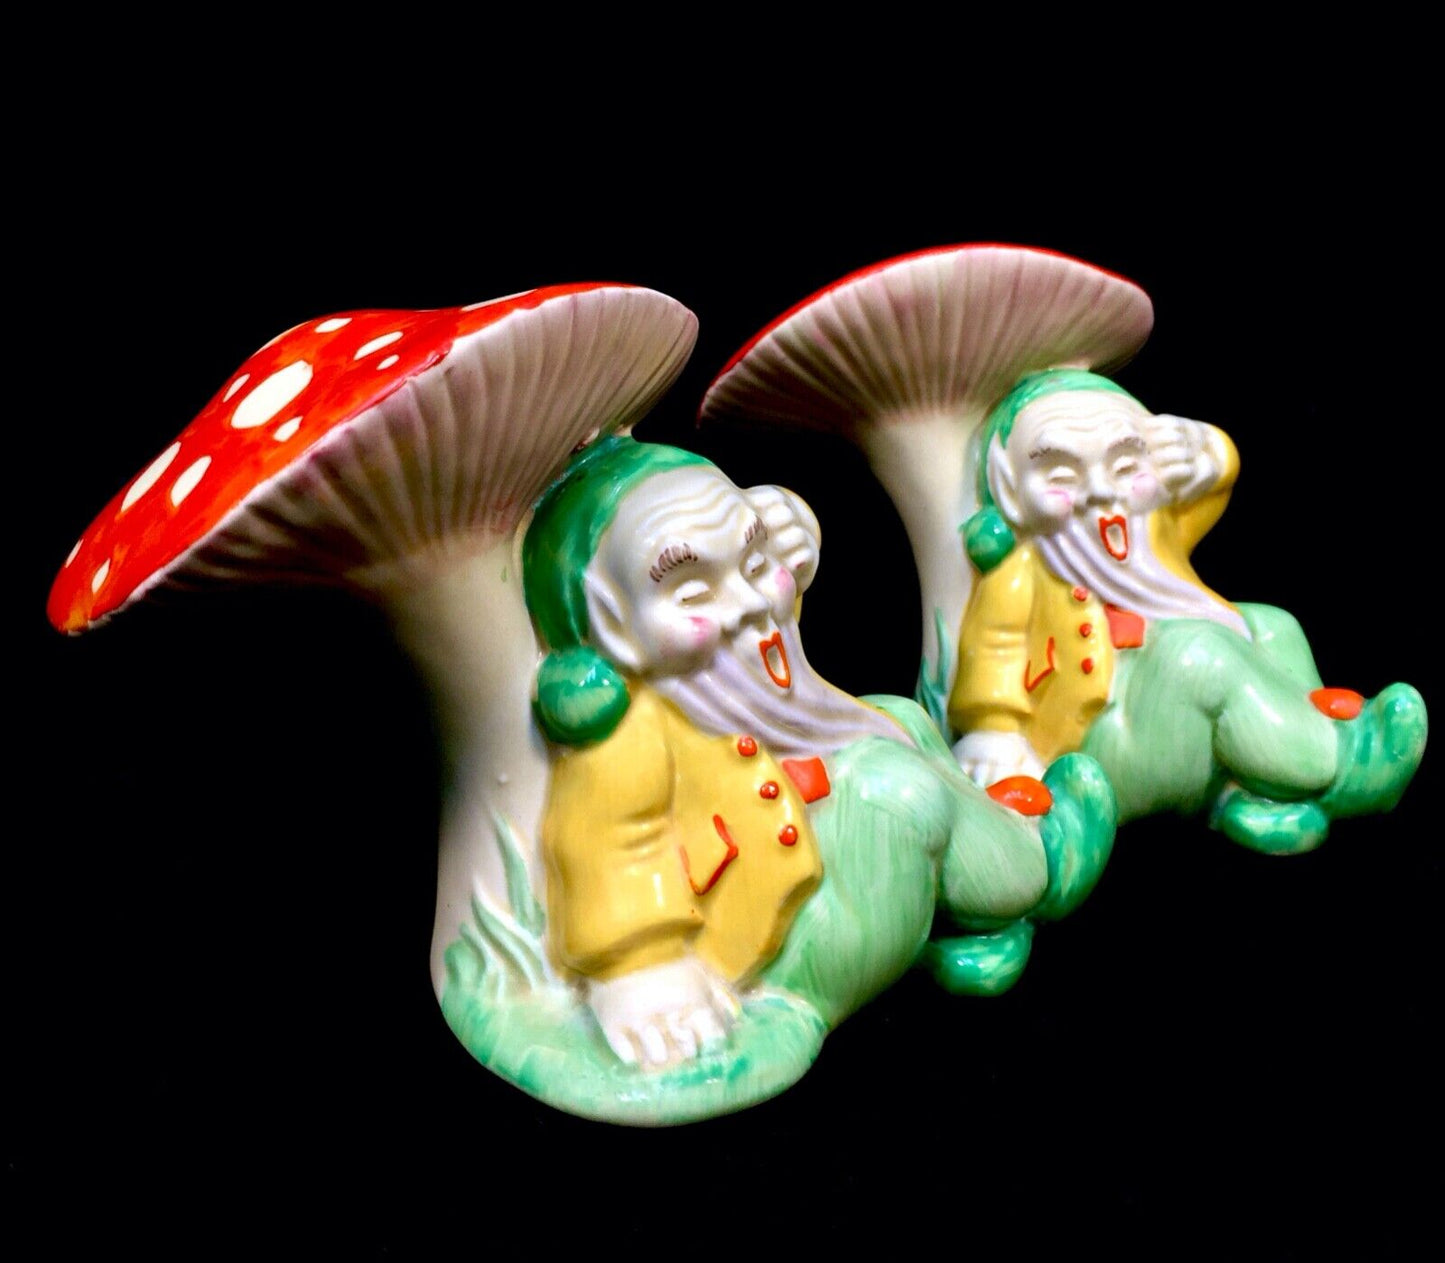 Clarice Cliff - Pair of Novelty Gnome Figurines / Art Deco Pottery / c1936